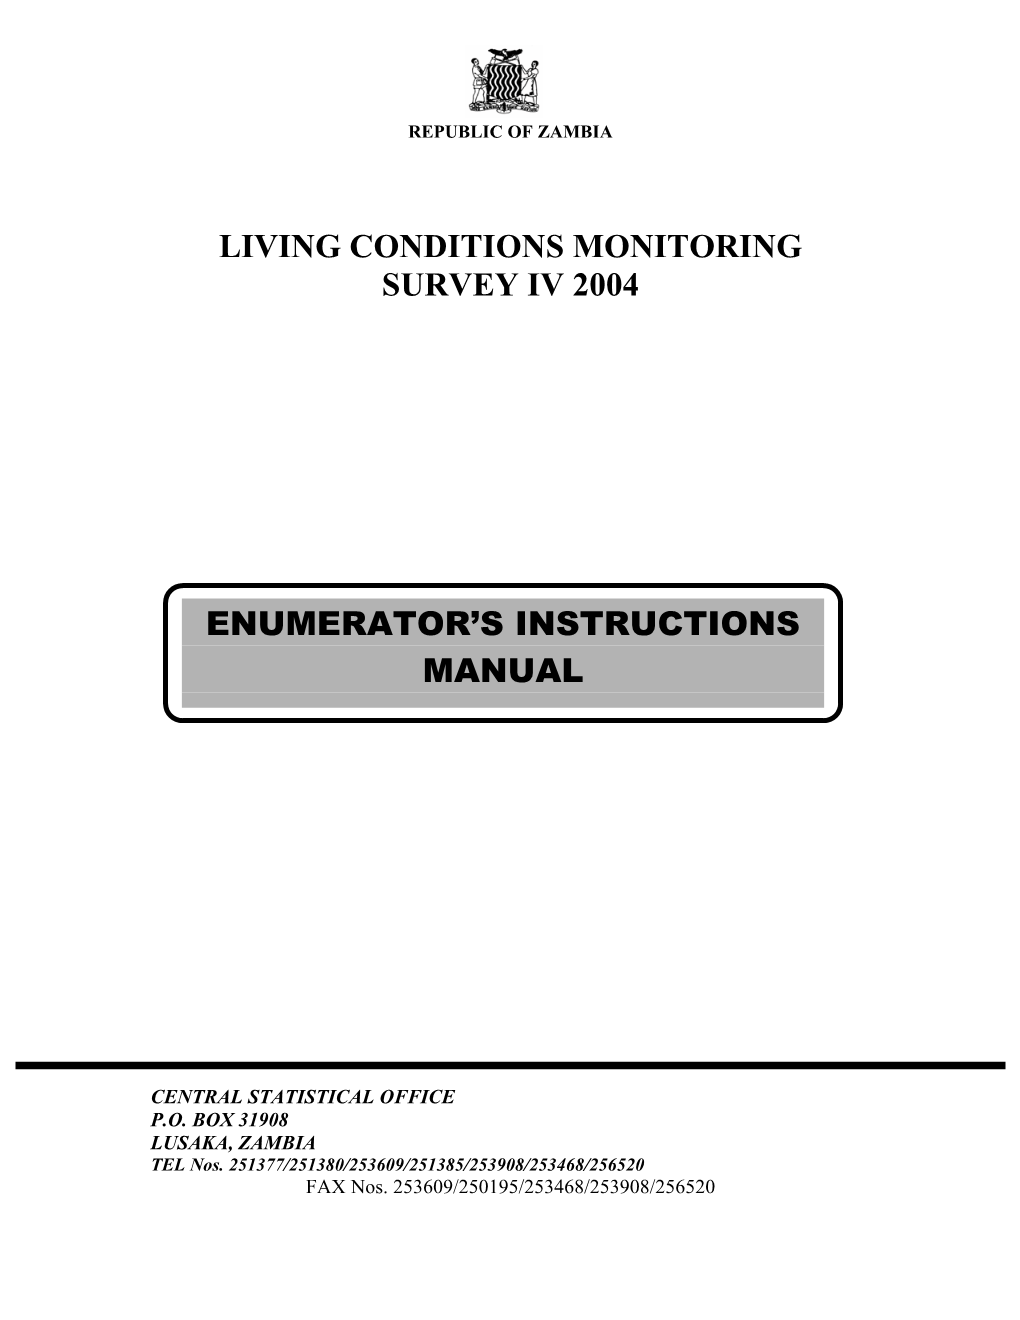 Living Conditions Monitoring Survey Iv 2004 Enumerator's